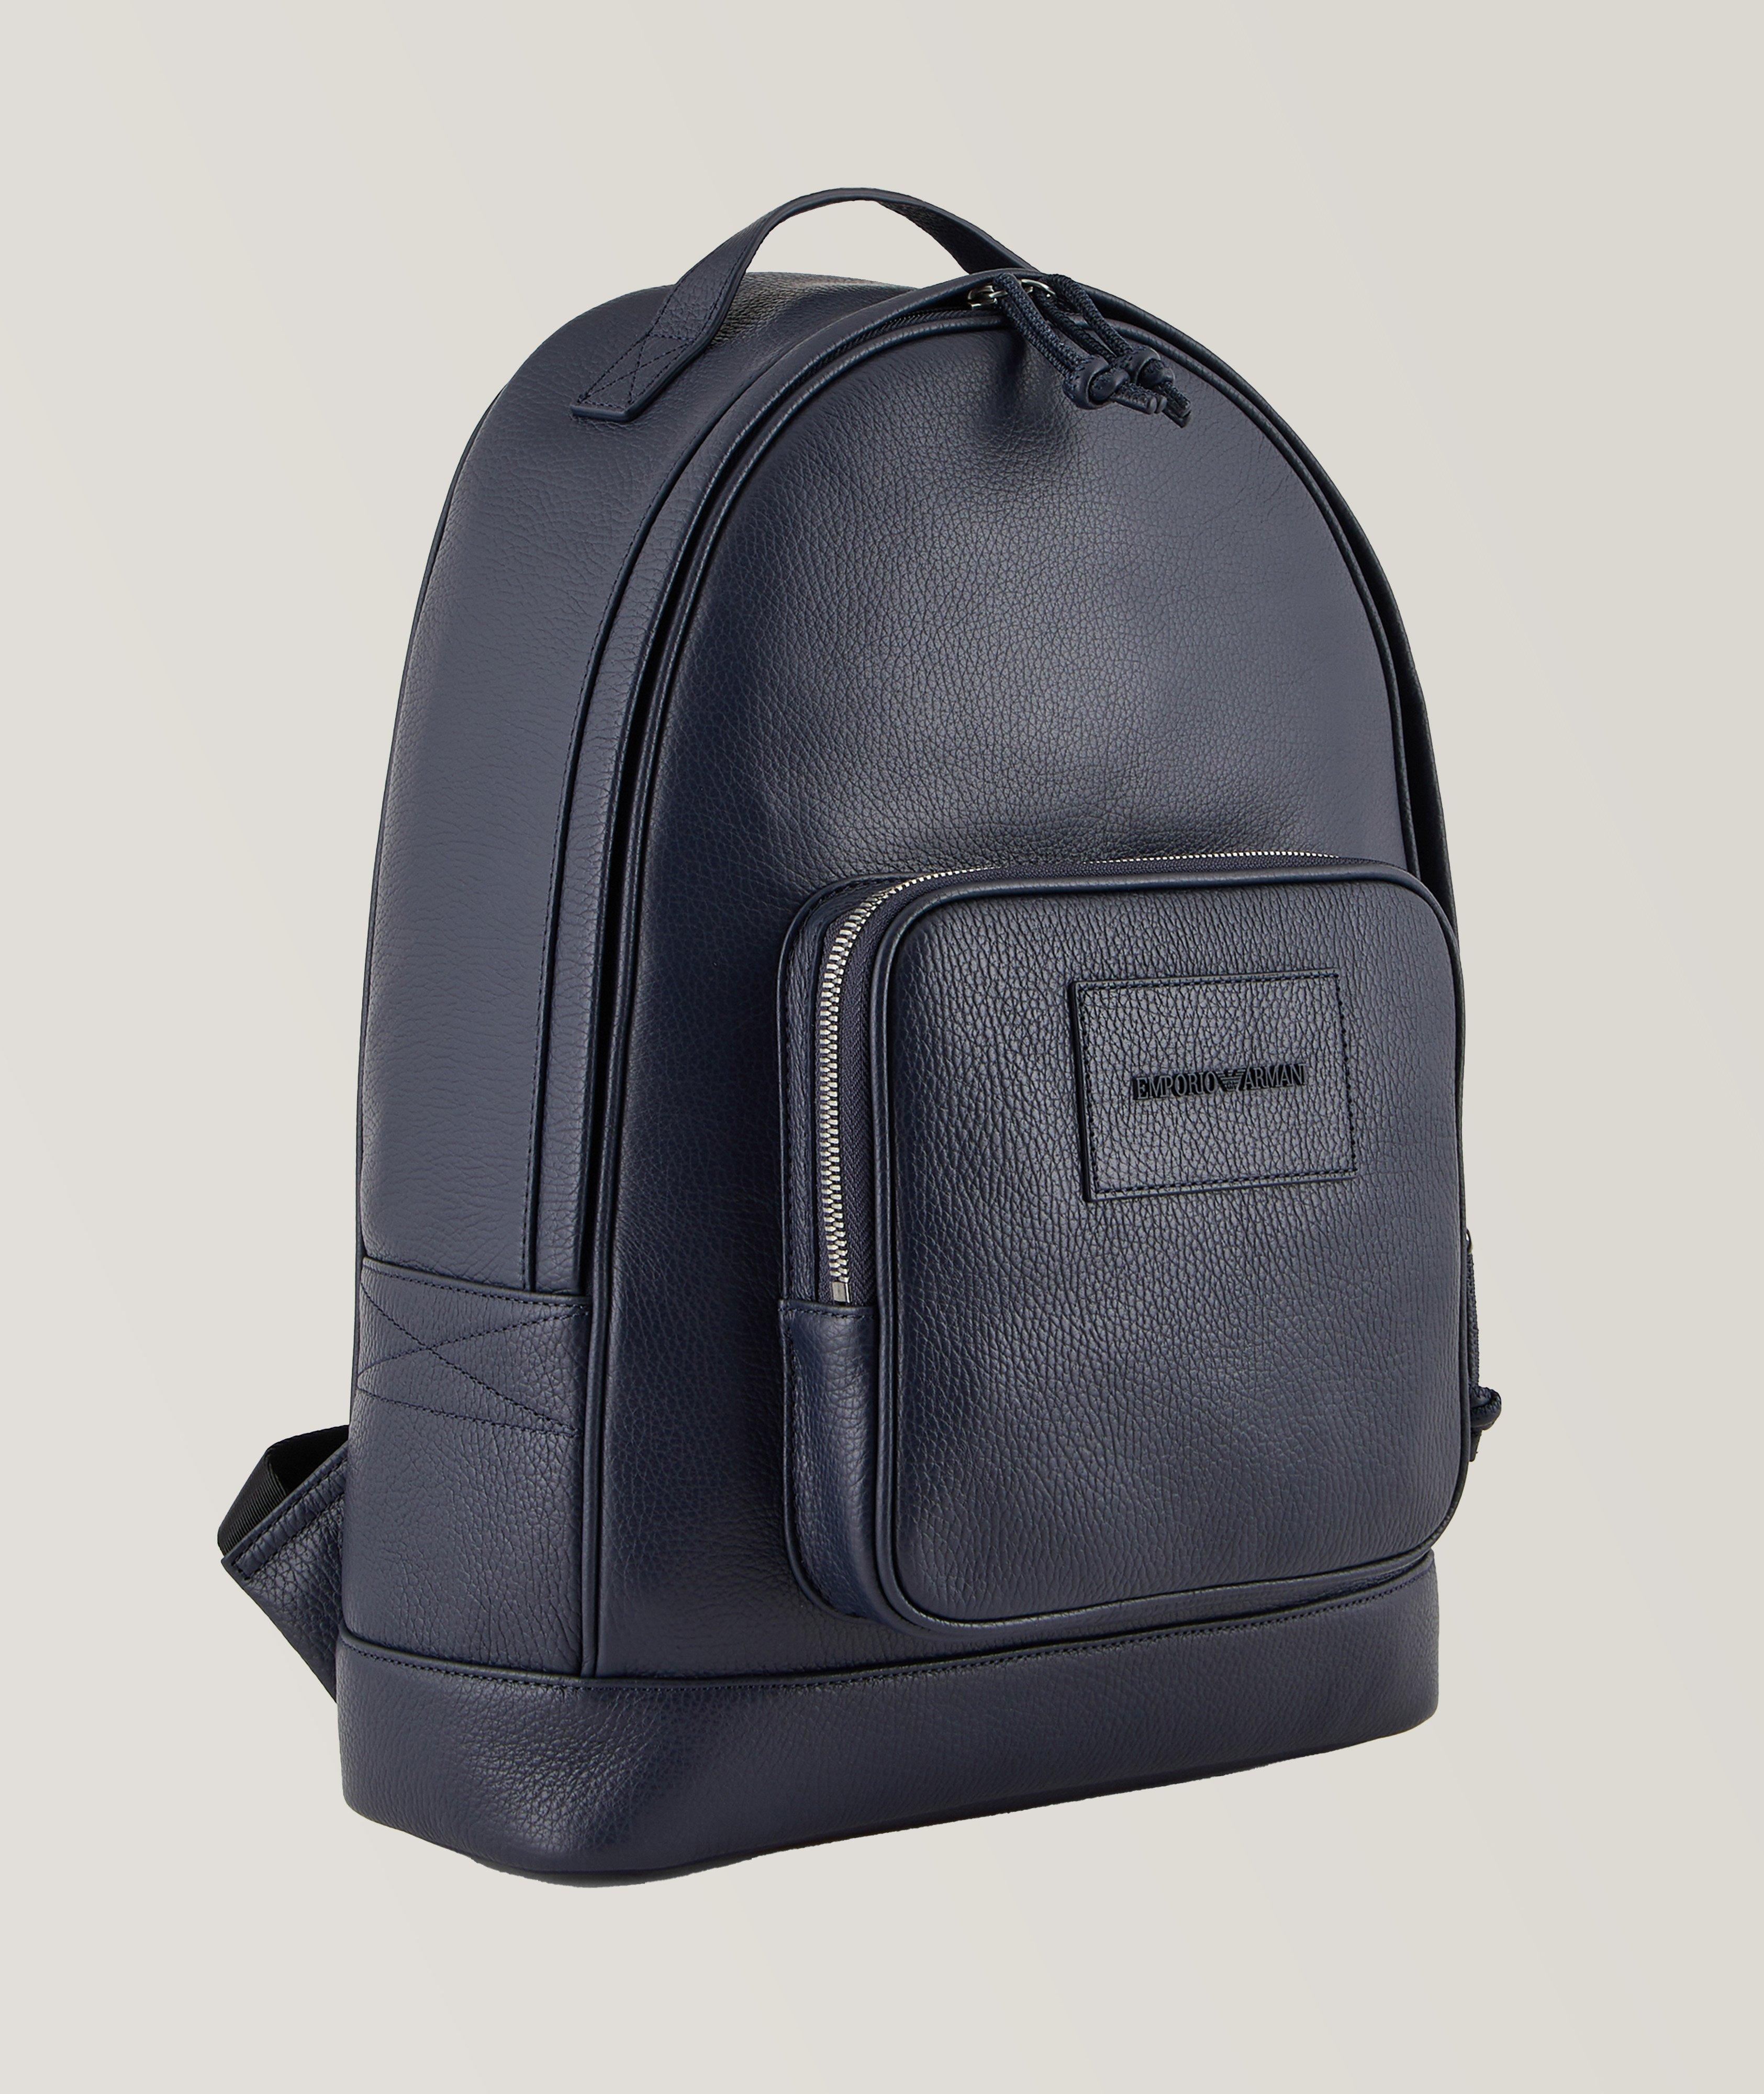 Logo Embossed Leather Backpack image 0